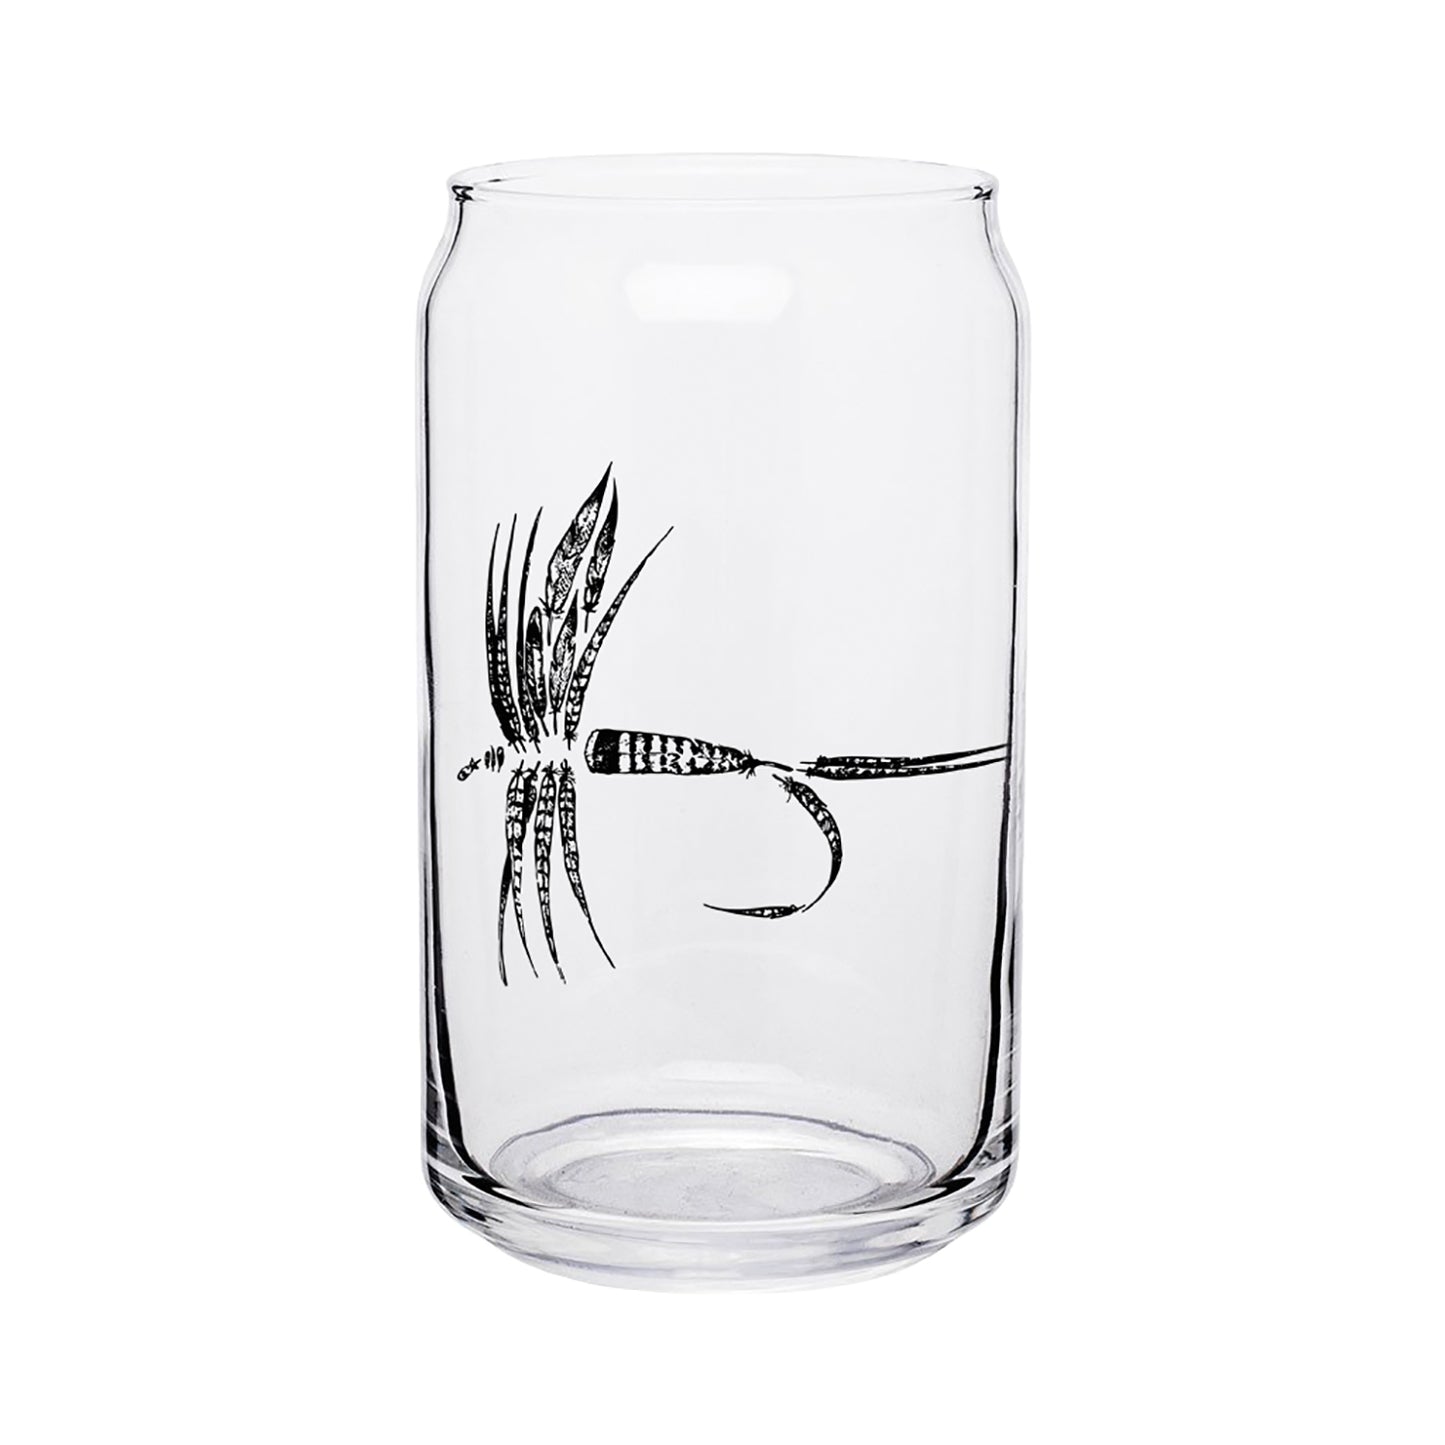 Beer can shaped glass with a dry fly made up of feathers in black ink